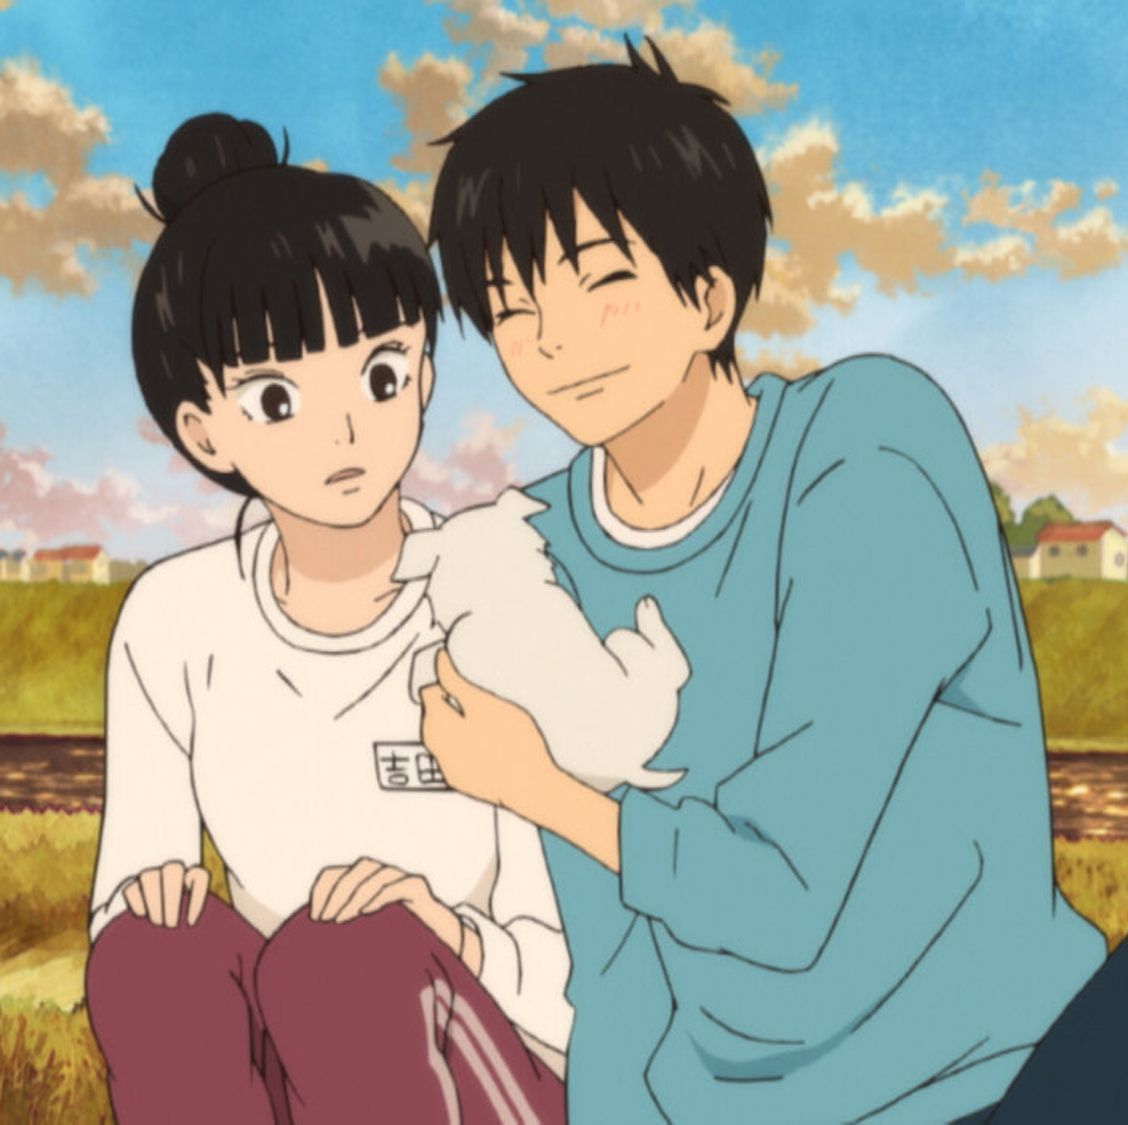 Yes, You Should Add These Romance Anime Shows and Movies to Your Watchlist